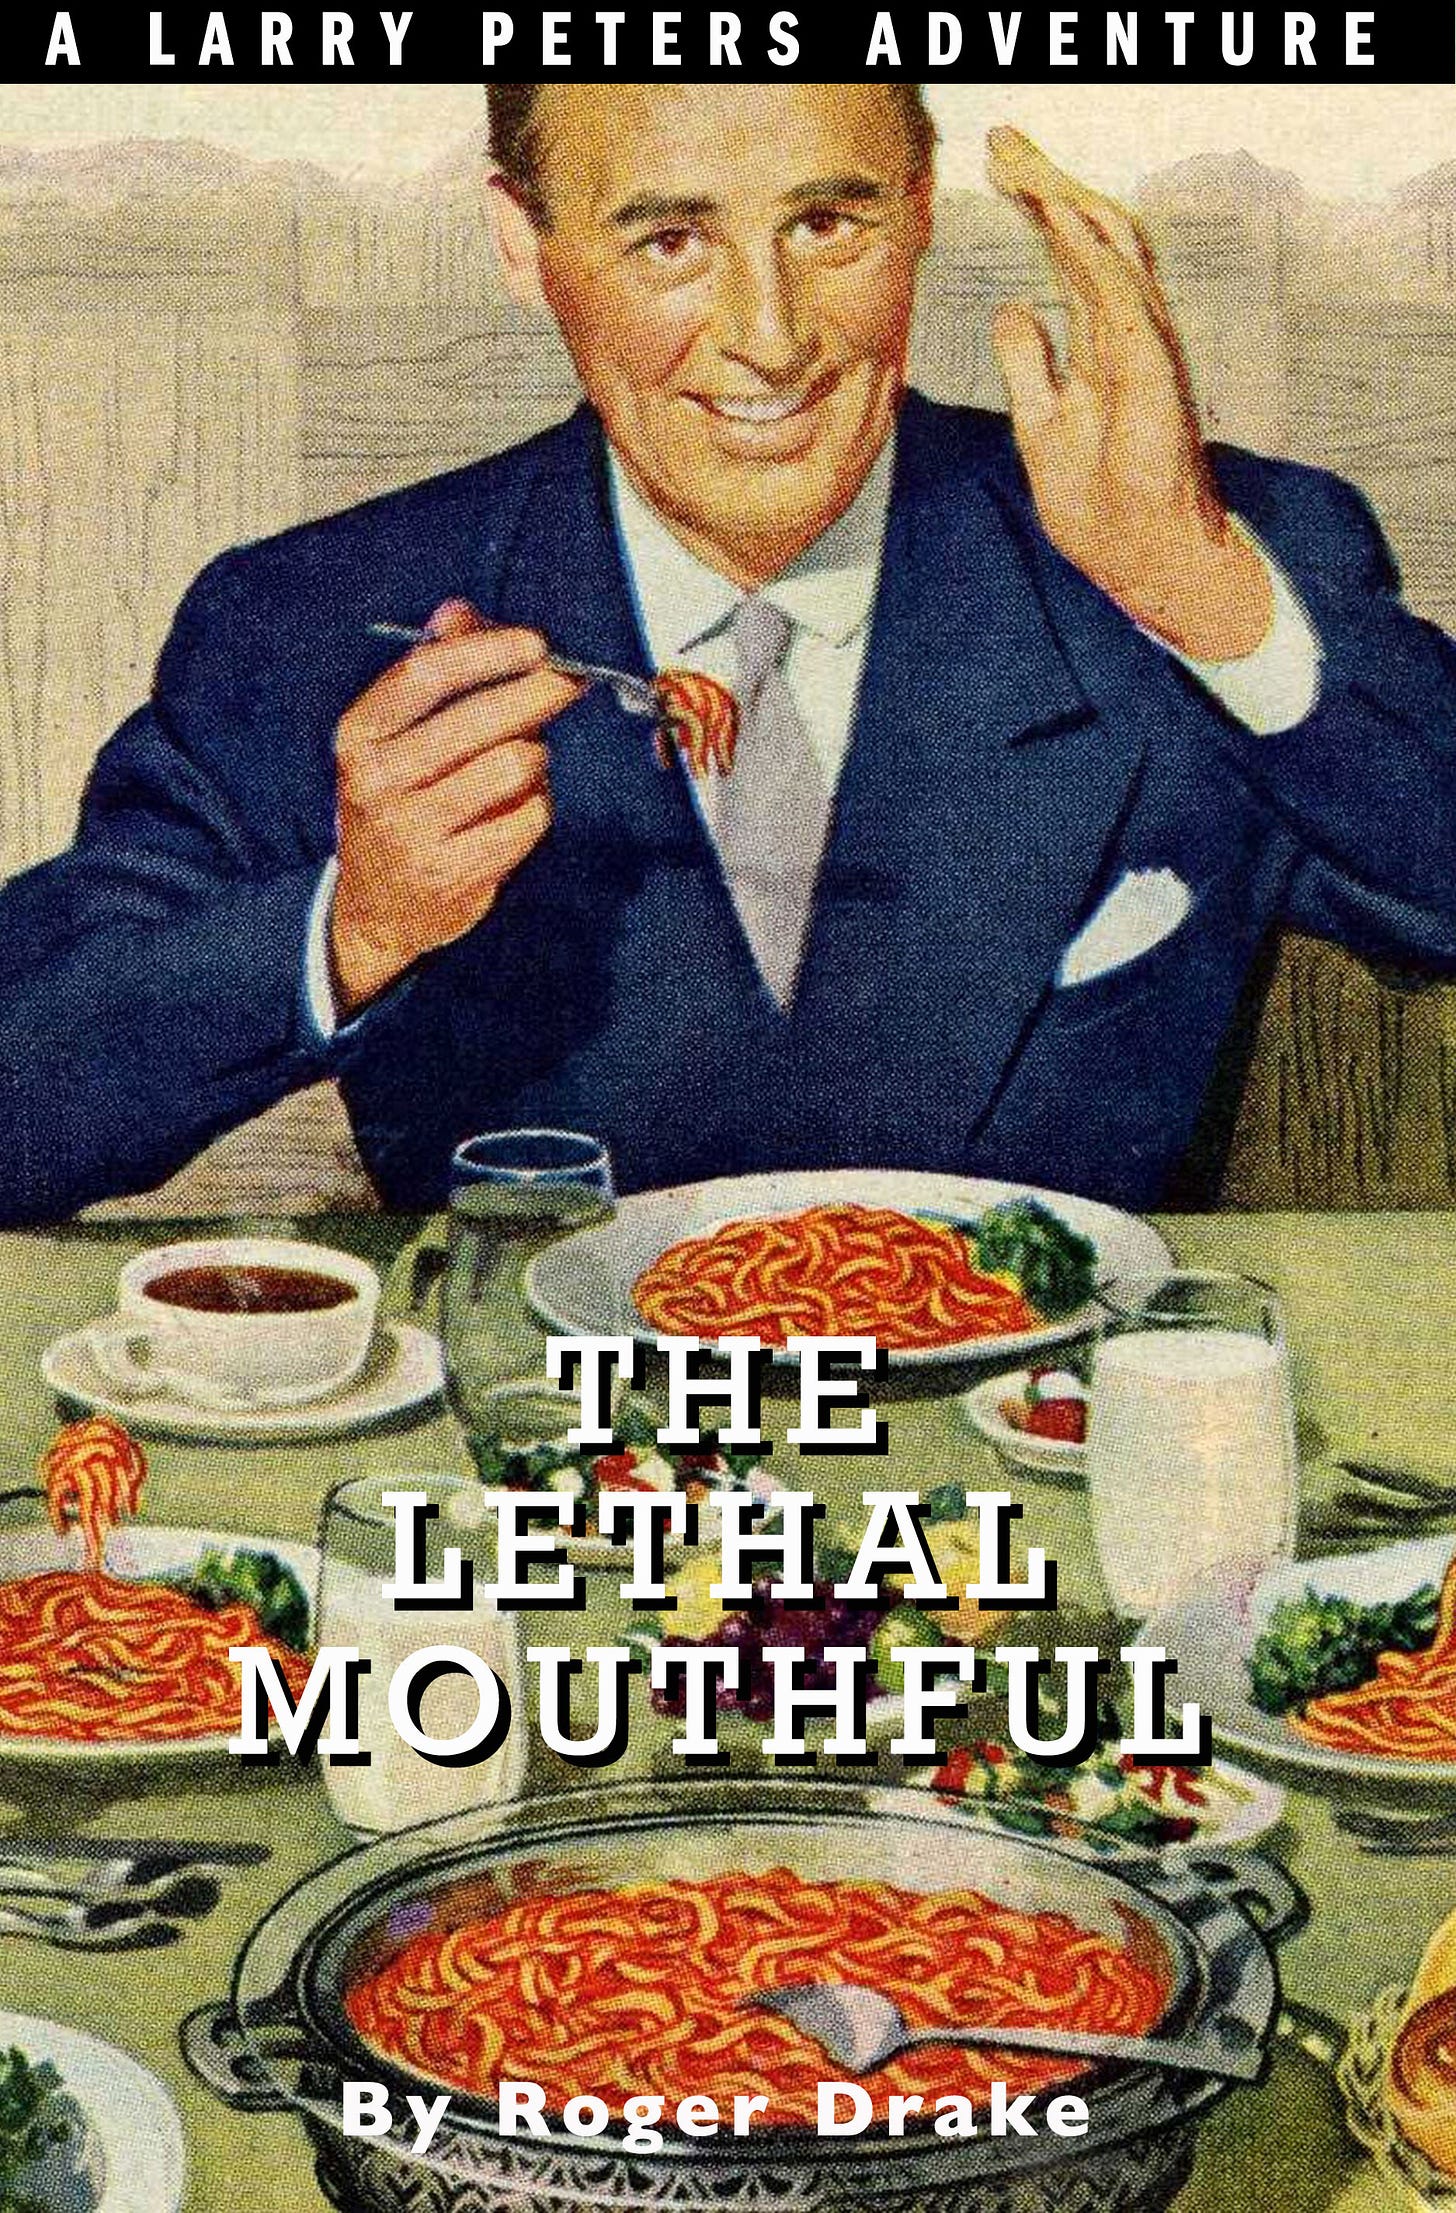 LethalMouthful